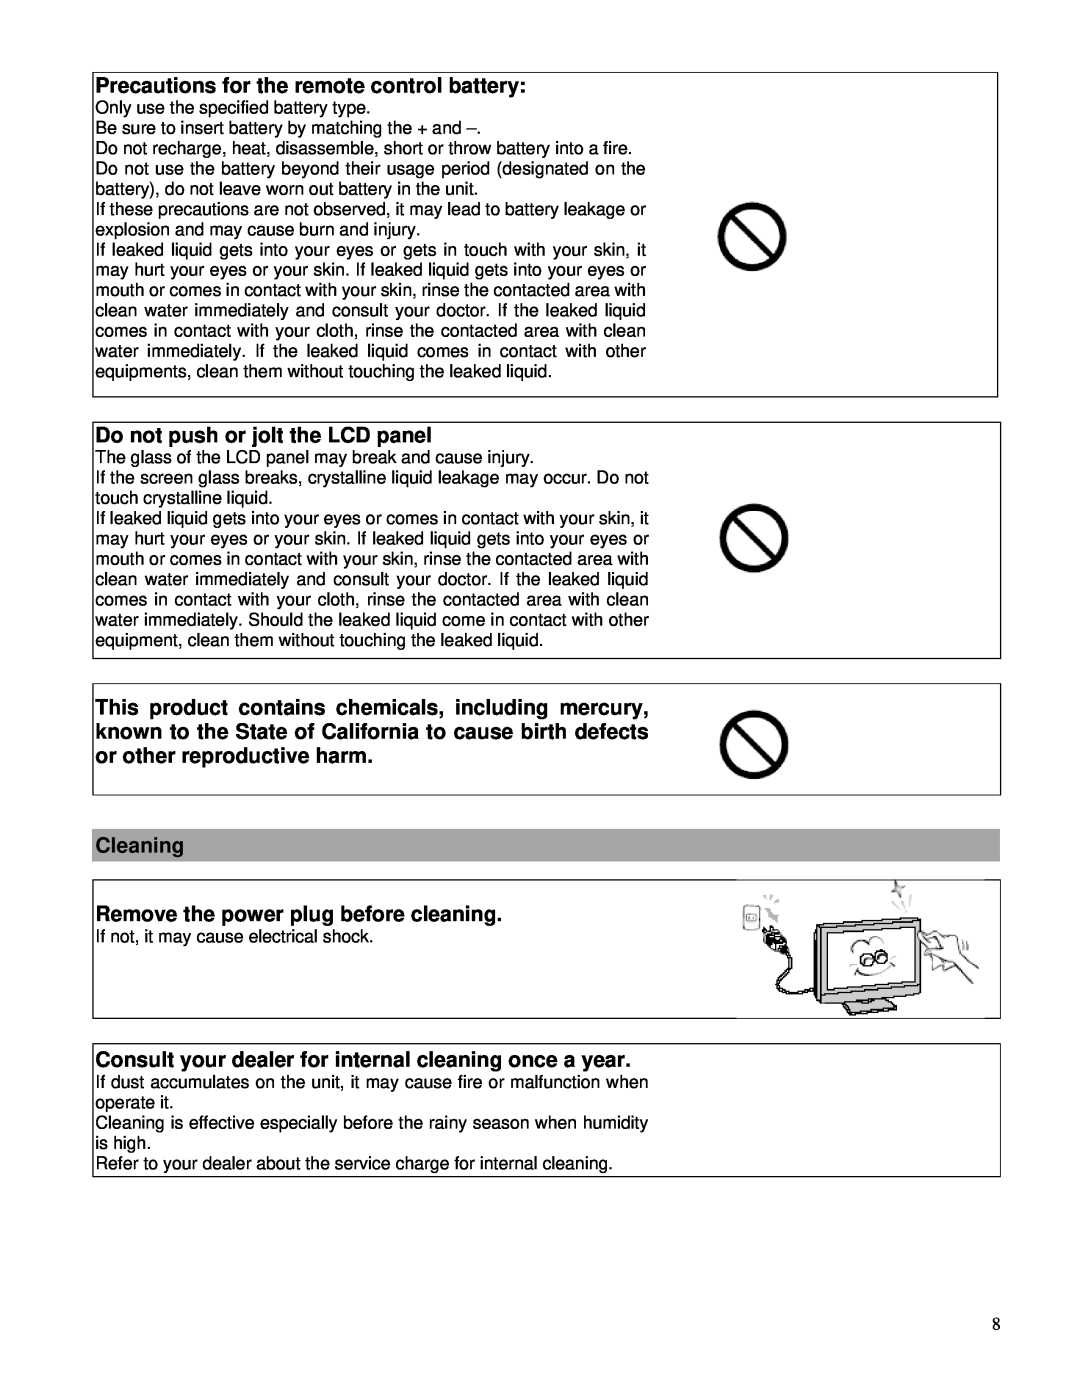 Toshiba P42LHA owner manual Precautions for the remote control battery, Do not push or jolt the LCD panel 